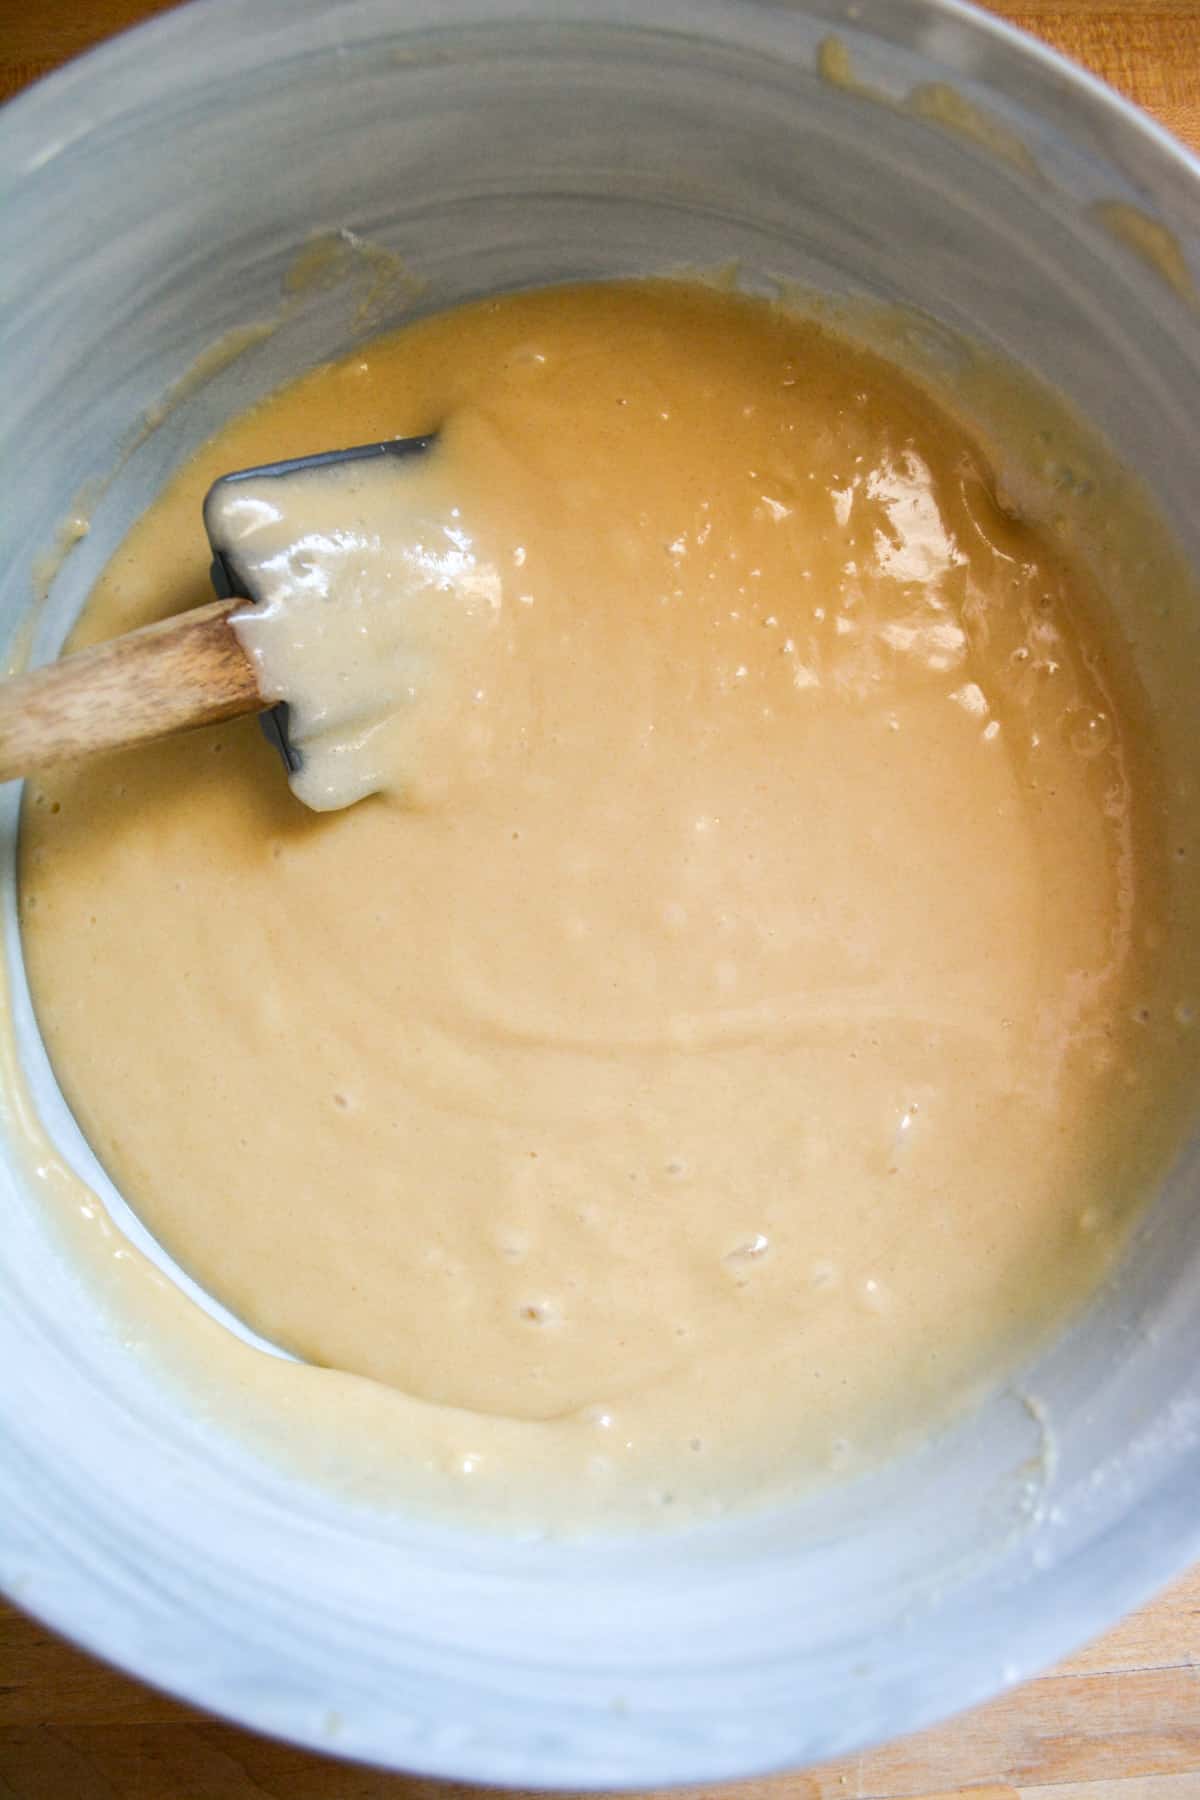 Cupcake batter in a mixing bowl with a rubber spatula off to the left.